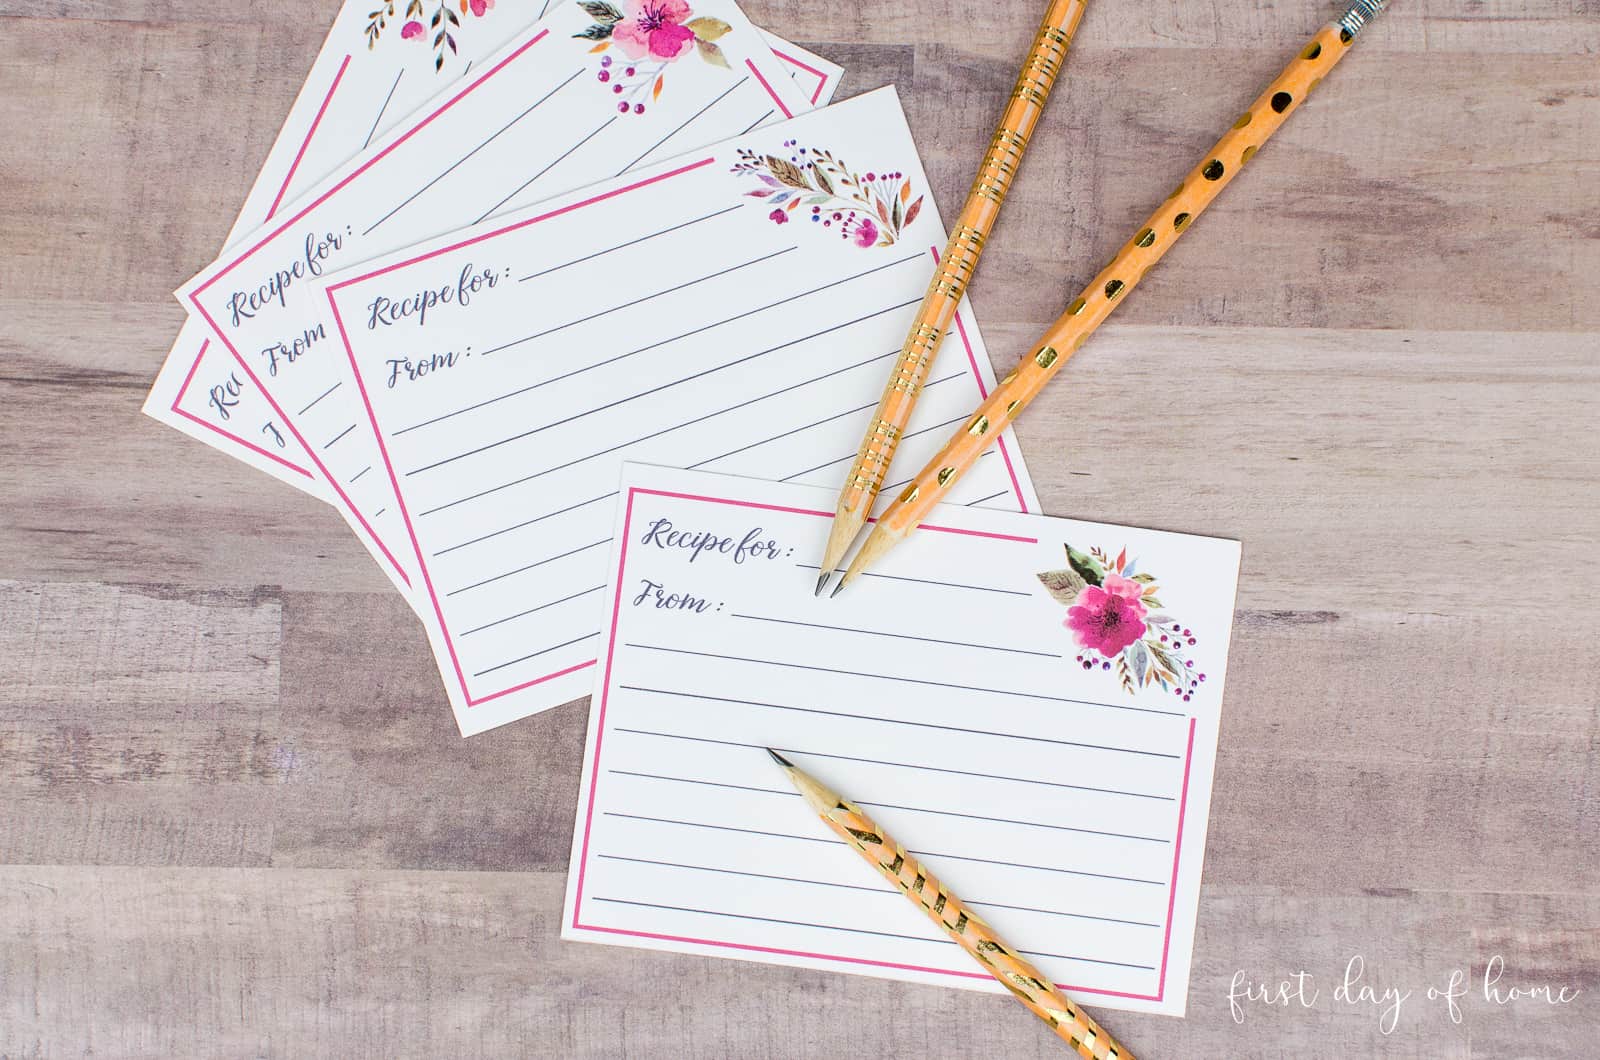 Recipe cards with floral design and gold washi tape pencils